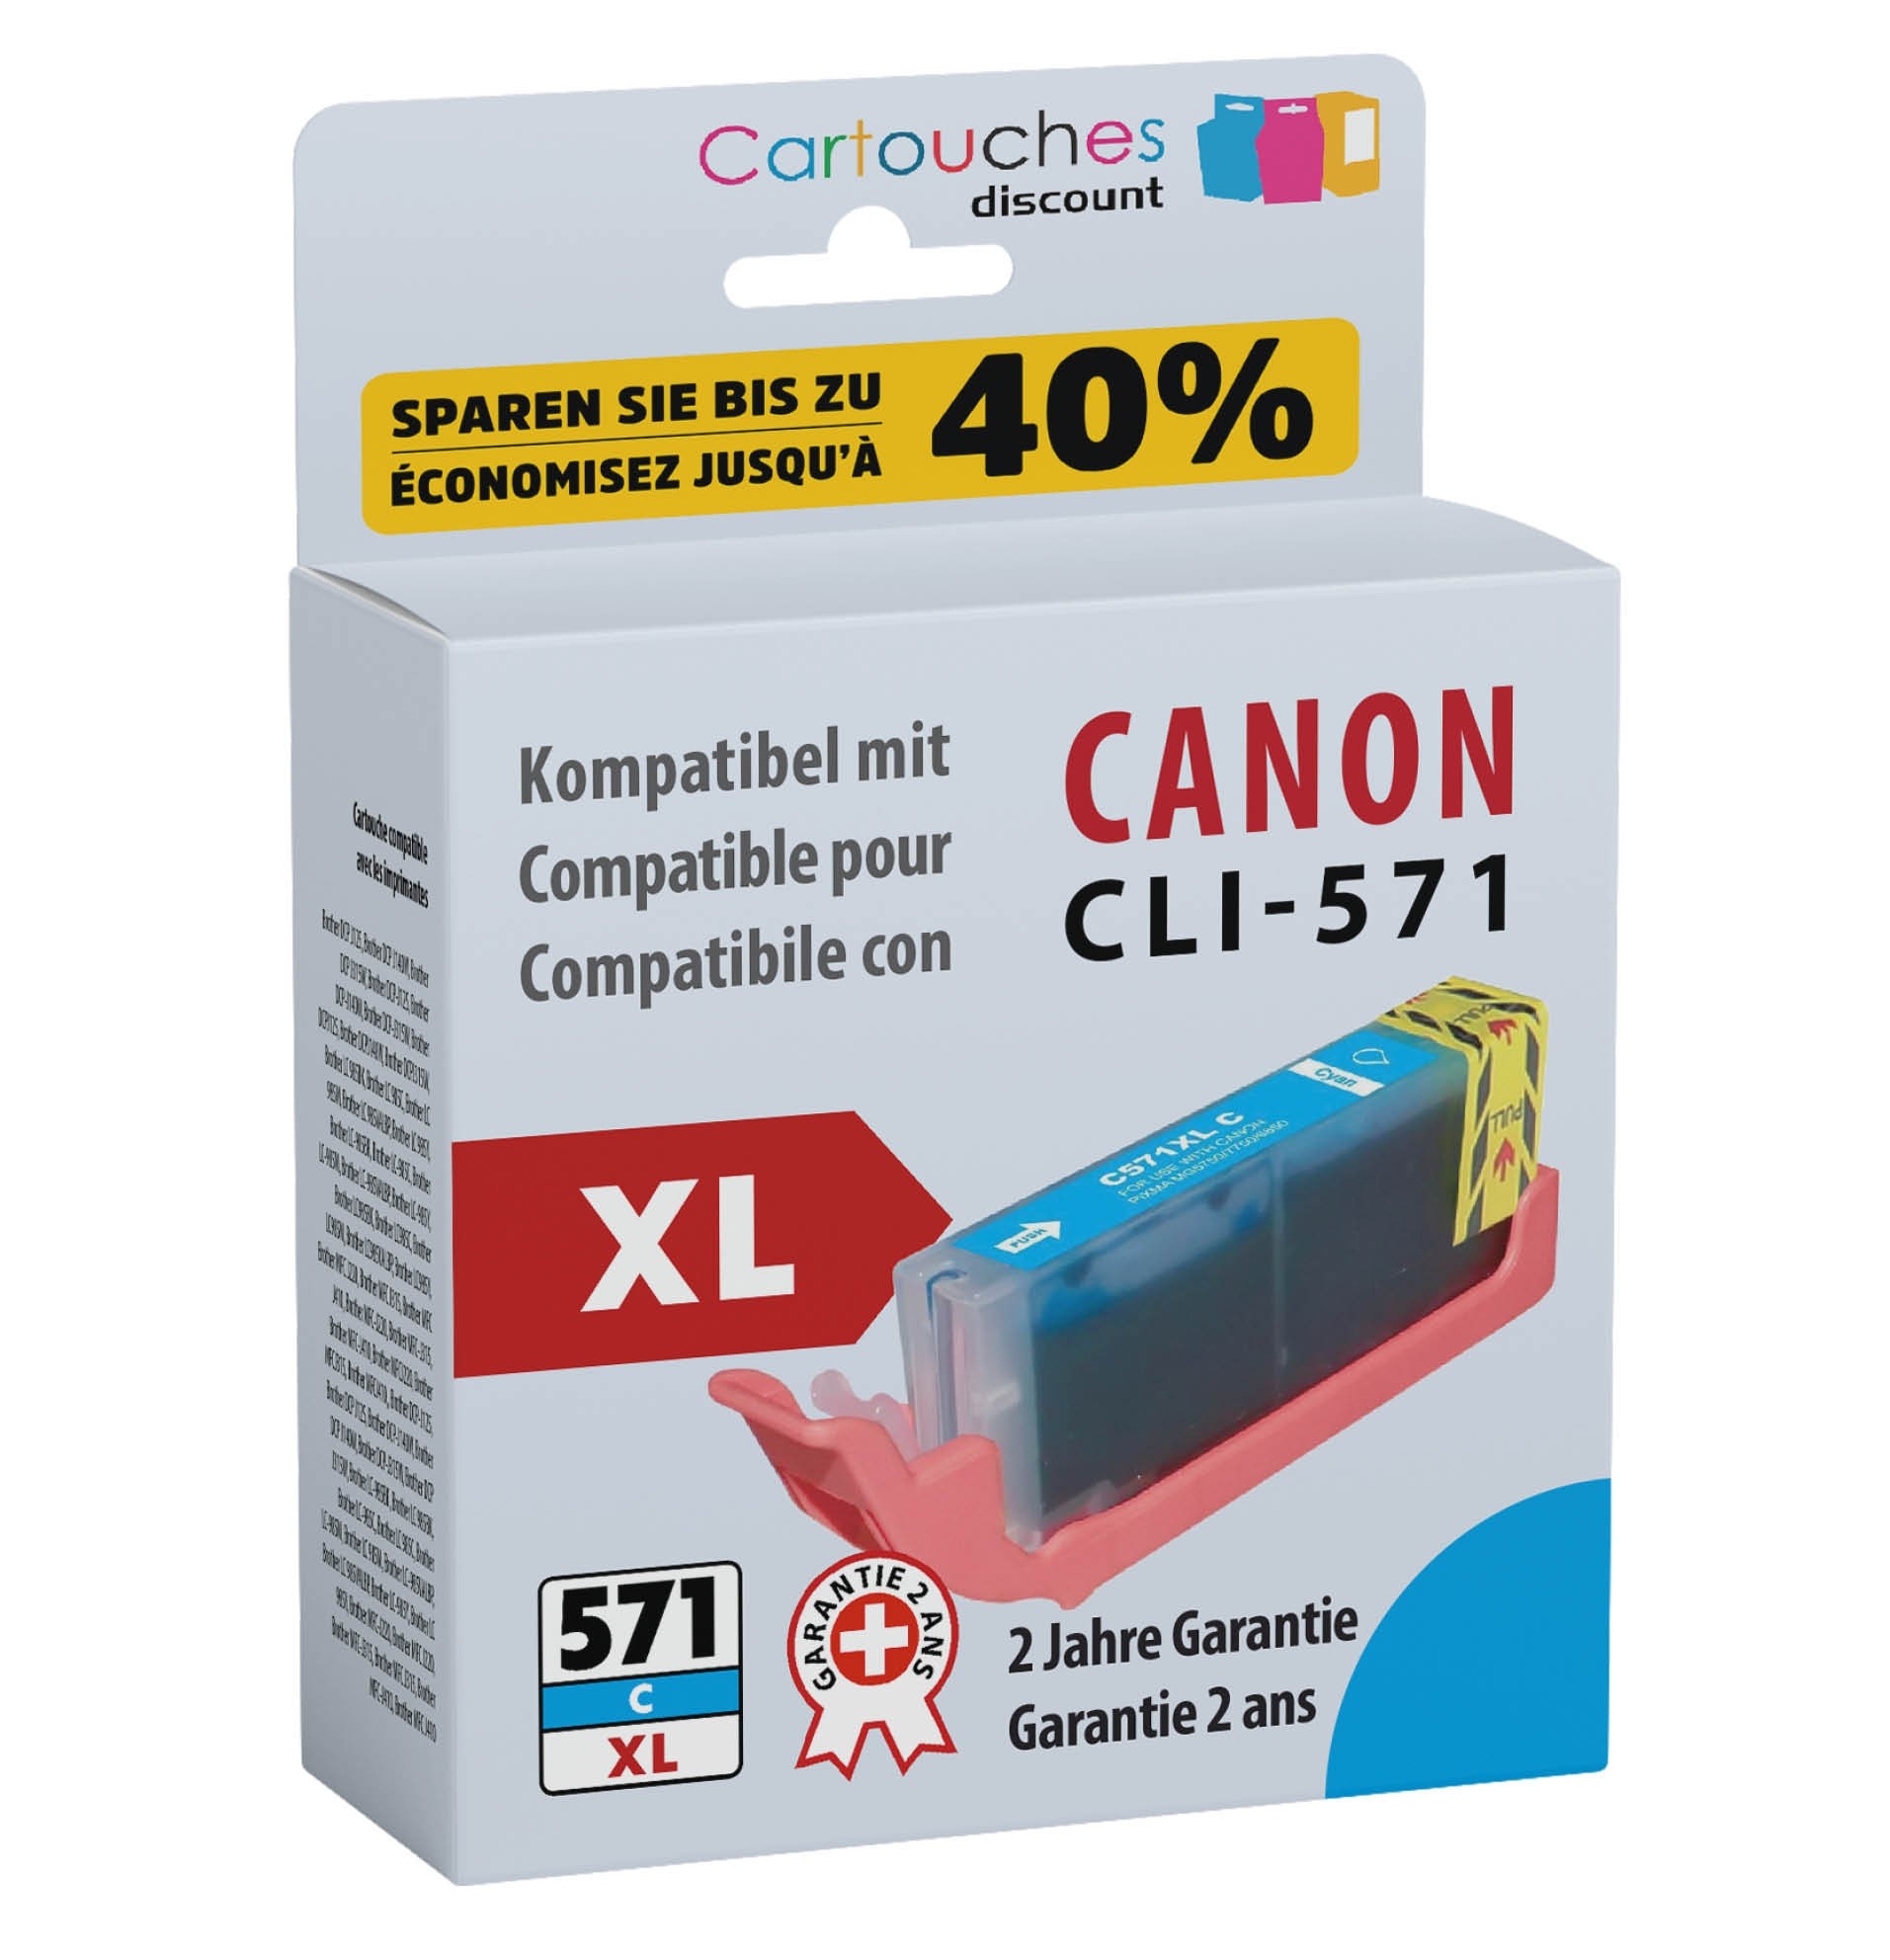 Cartouches d'encre - Cartouche compatible Canon CLI-571 XL / Cyan -  Consommables HP CANON BROTHER